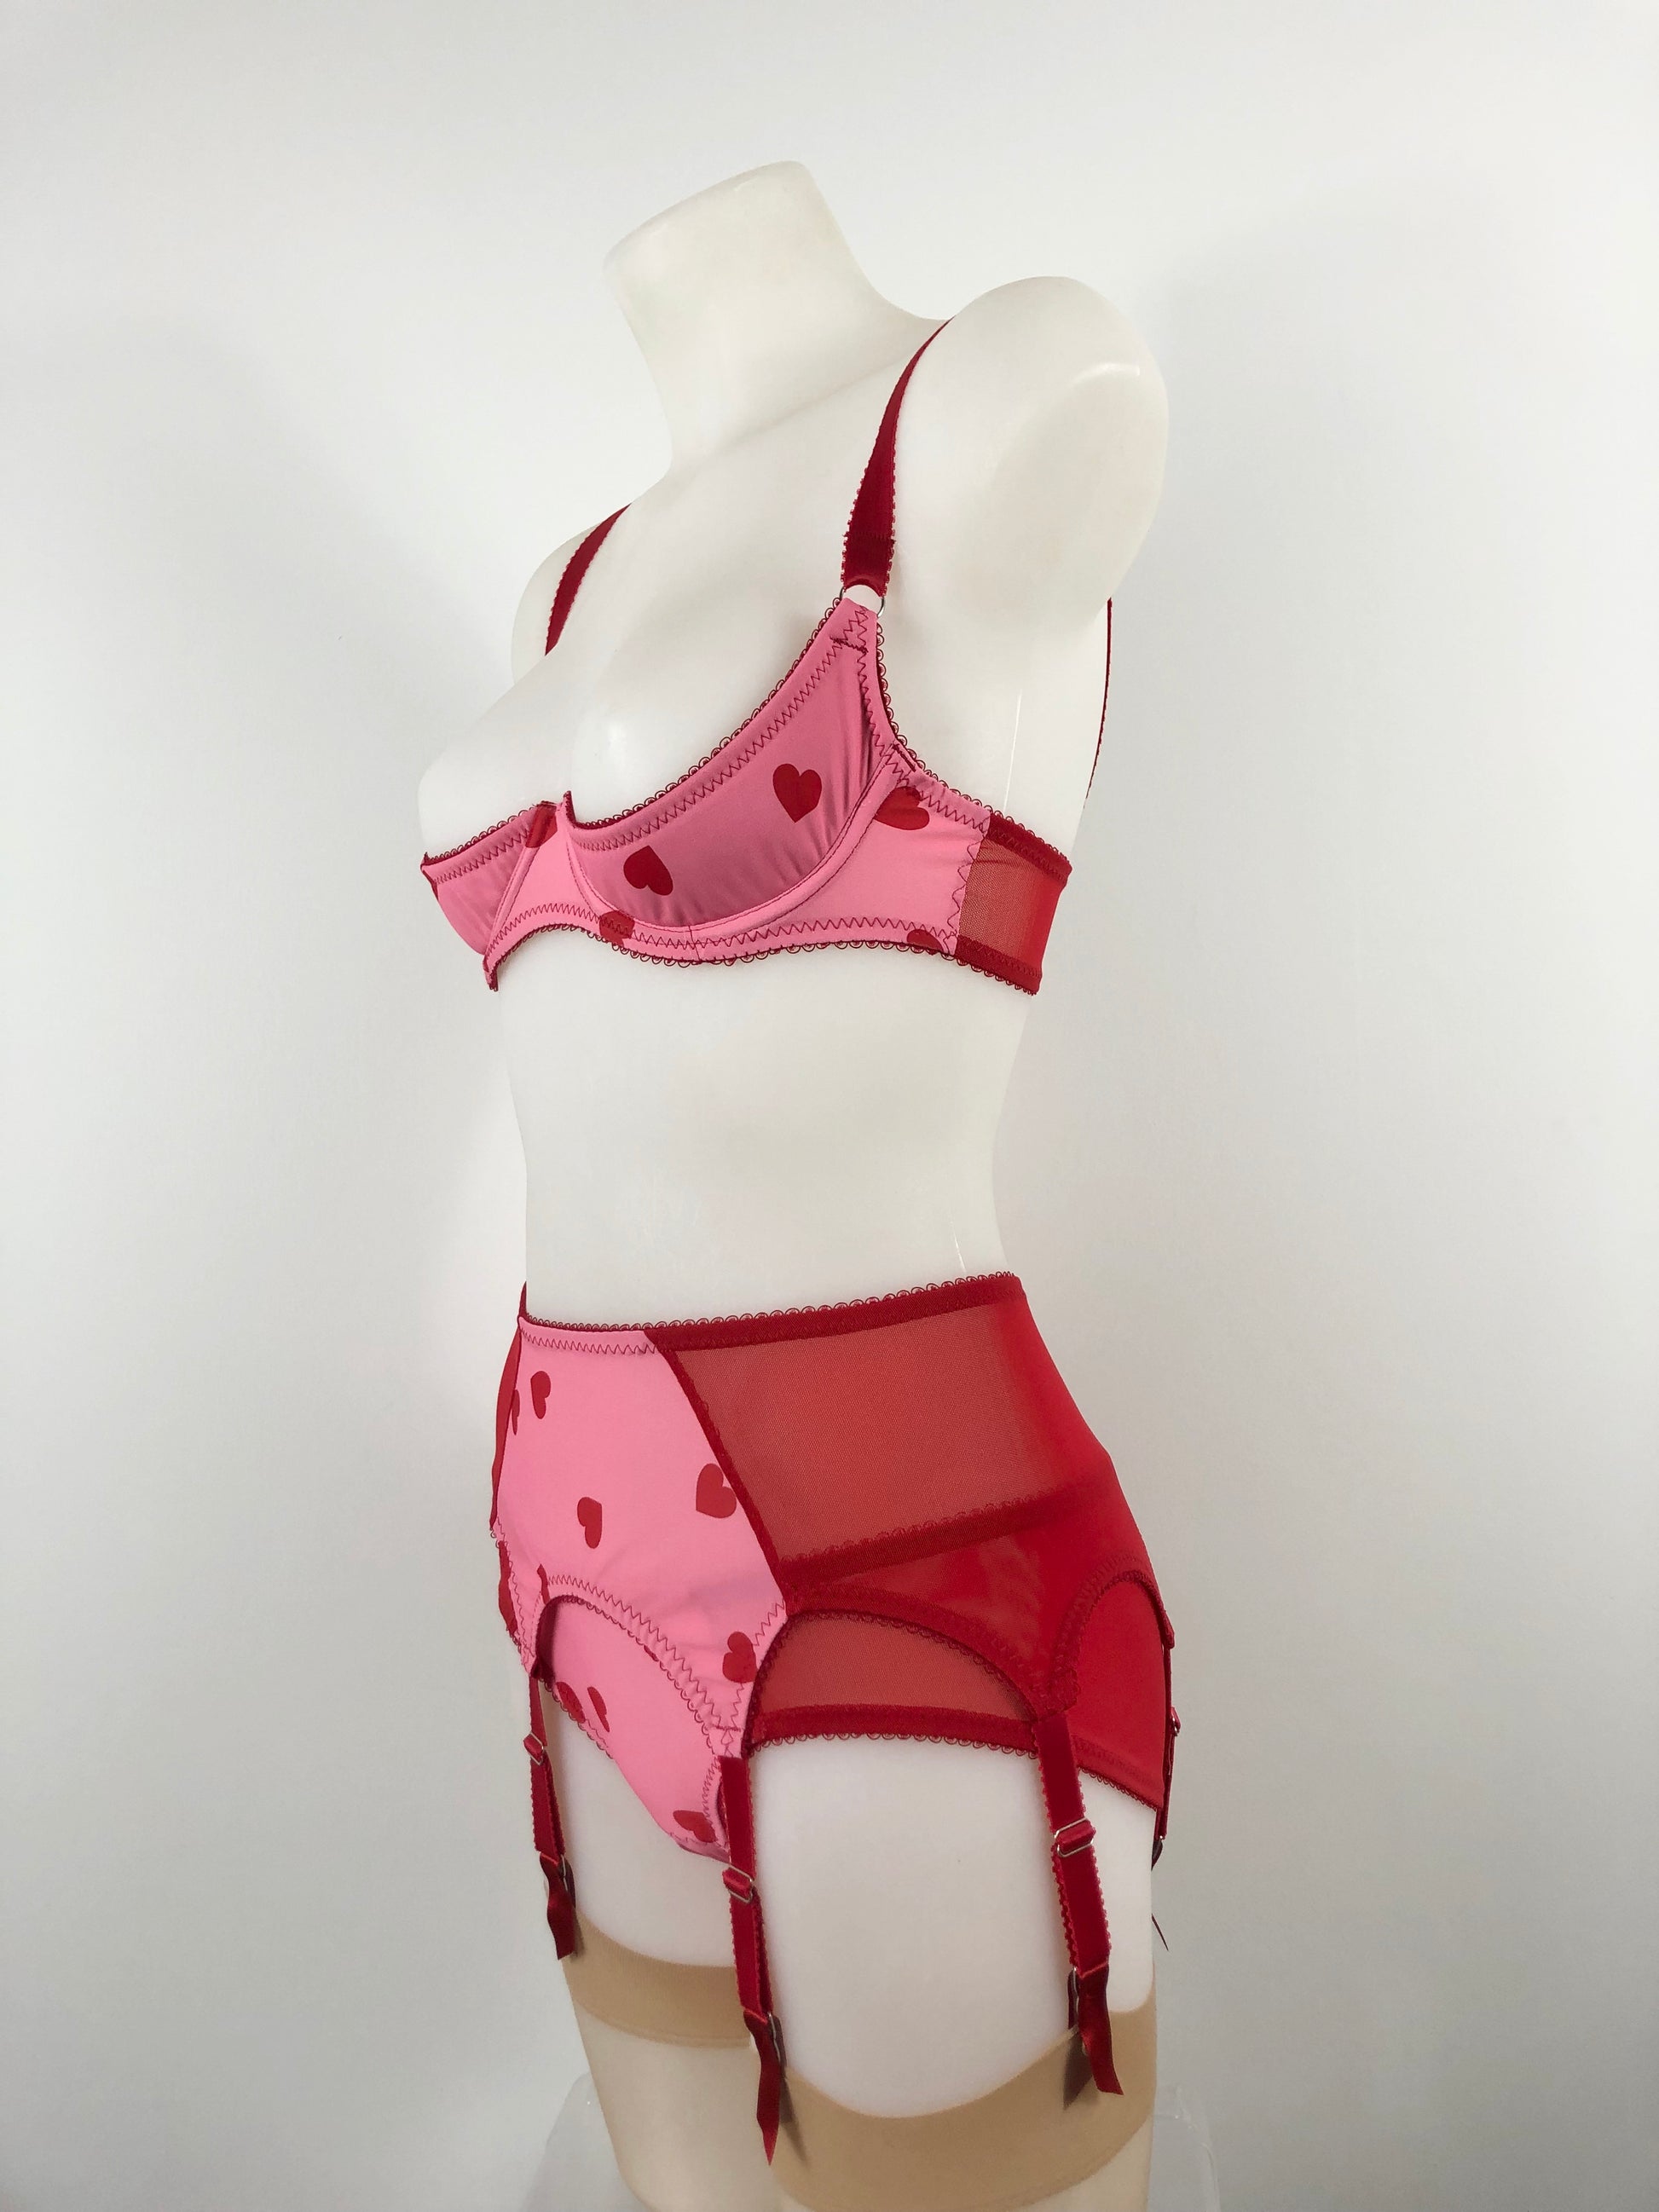 red and pink cheesecake heart lingerie. vintage inspired quarter cup shelf bra with pink heart front and red mesh sides, perfect for valentines cheesecake pin ups,  A fun, bold, playful retro inspired underwear set